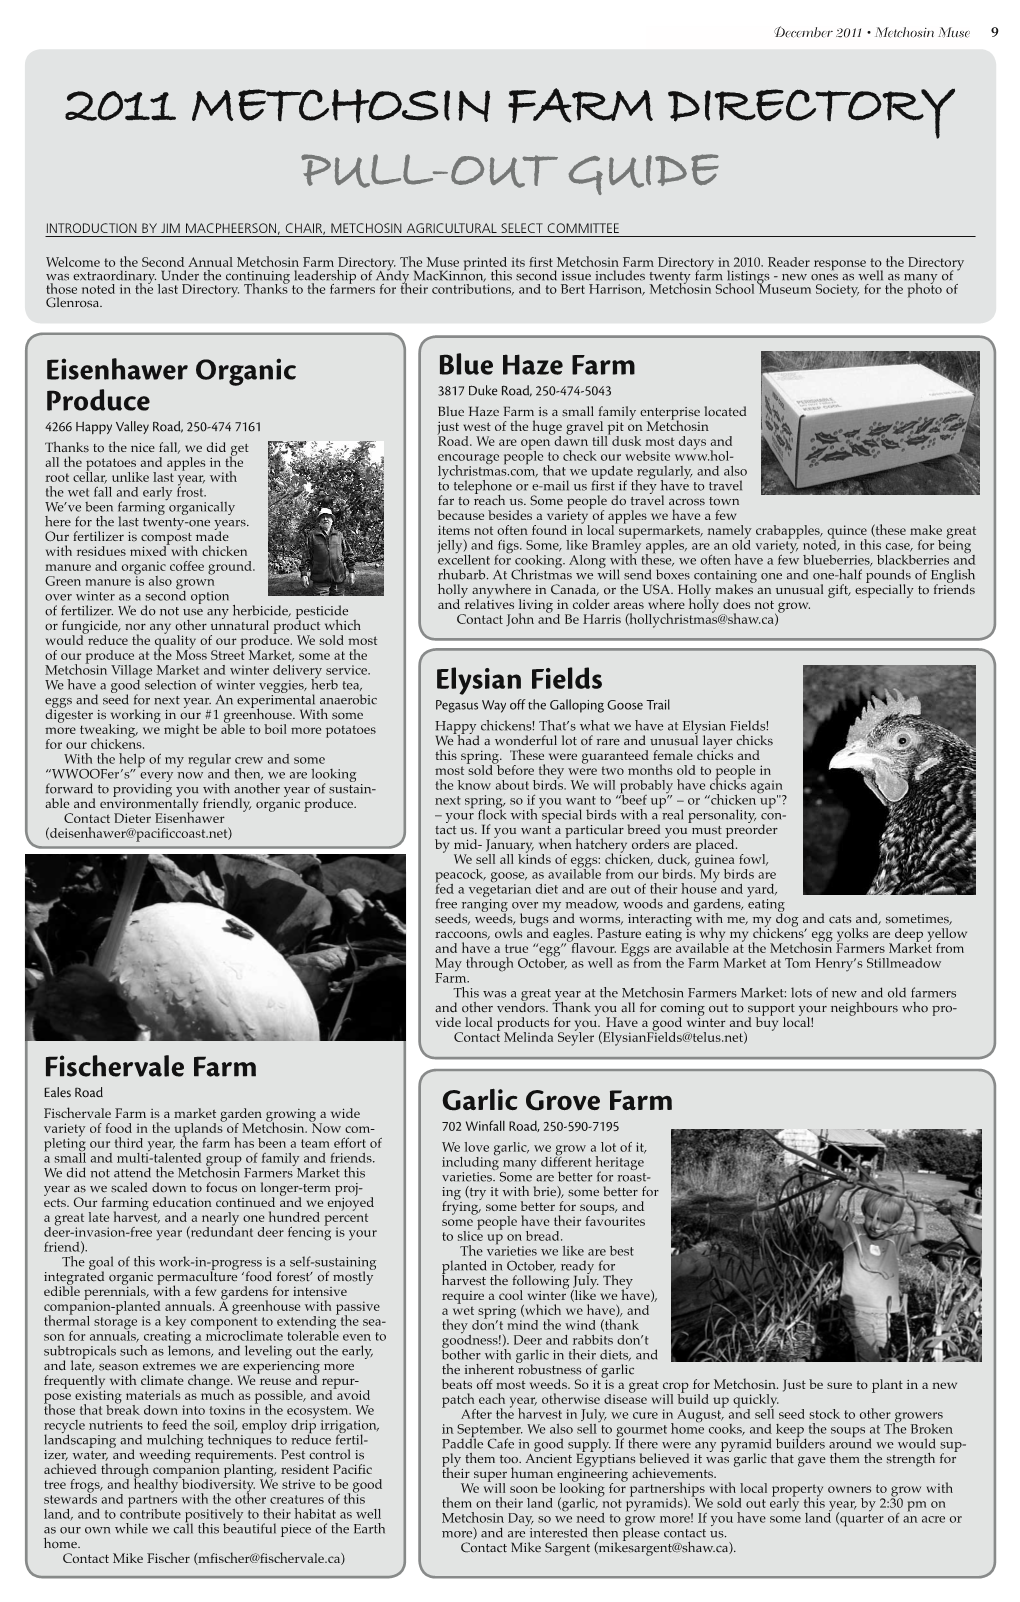 2011 Metchosin Farm Directory Pull-Out Guide